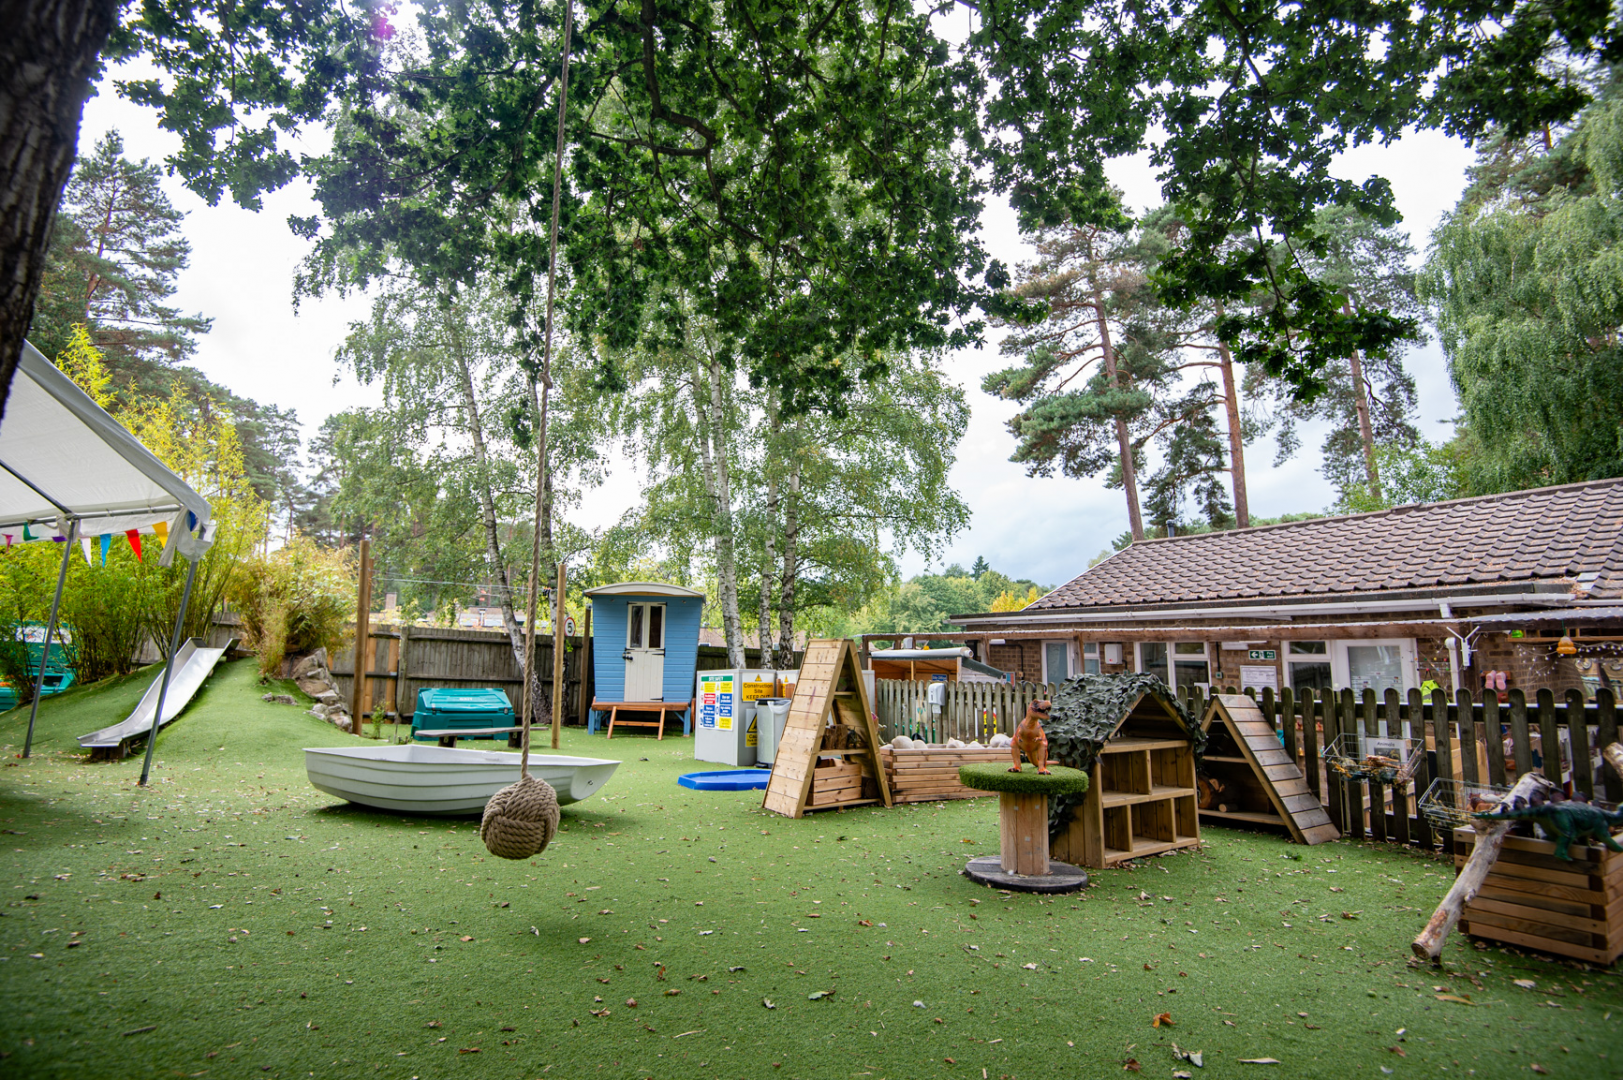 Outdoor garden with wide grassy play area